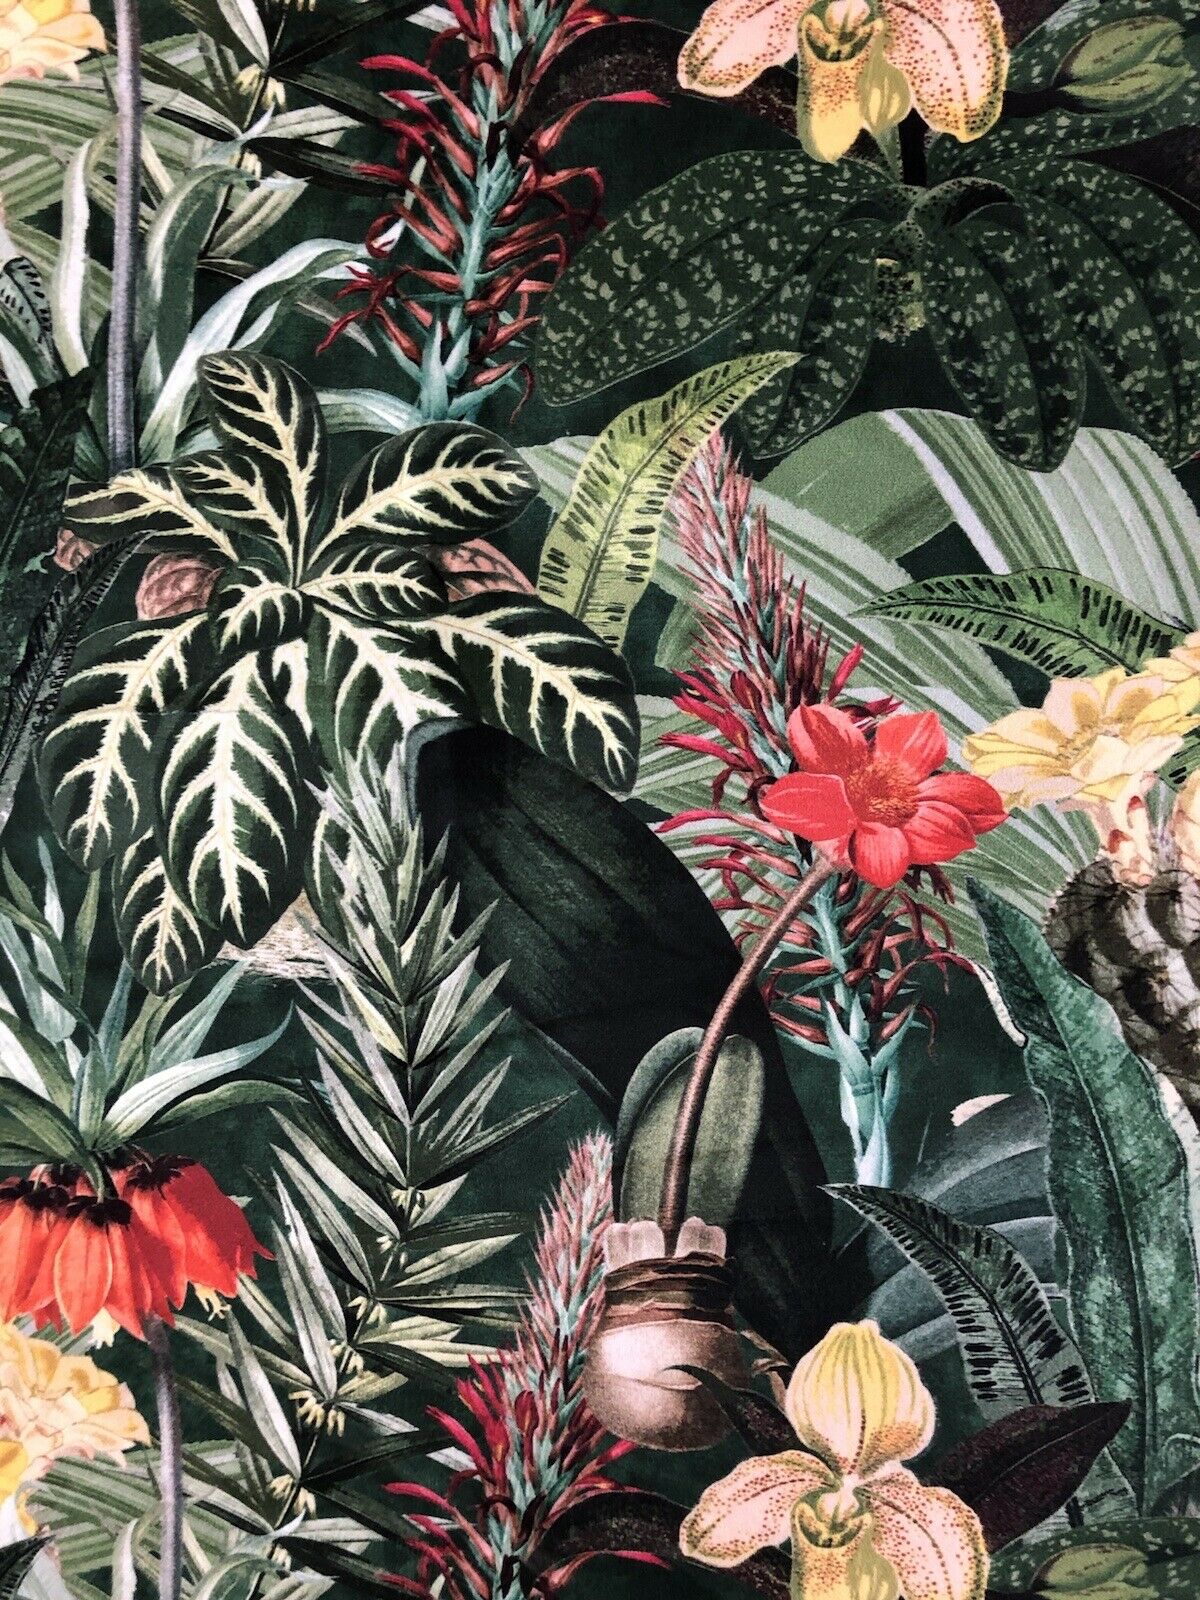 Greenhouse Floral fabric By The Meter Green Velvet Sewing Material Plants Greenery Leaves Jungle Orchid Flowers Pattern Textile for upholstery pillows cushions crafts